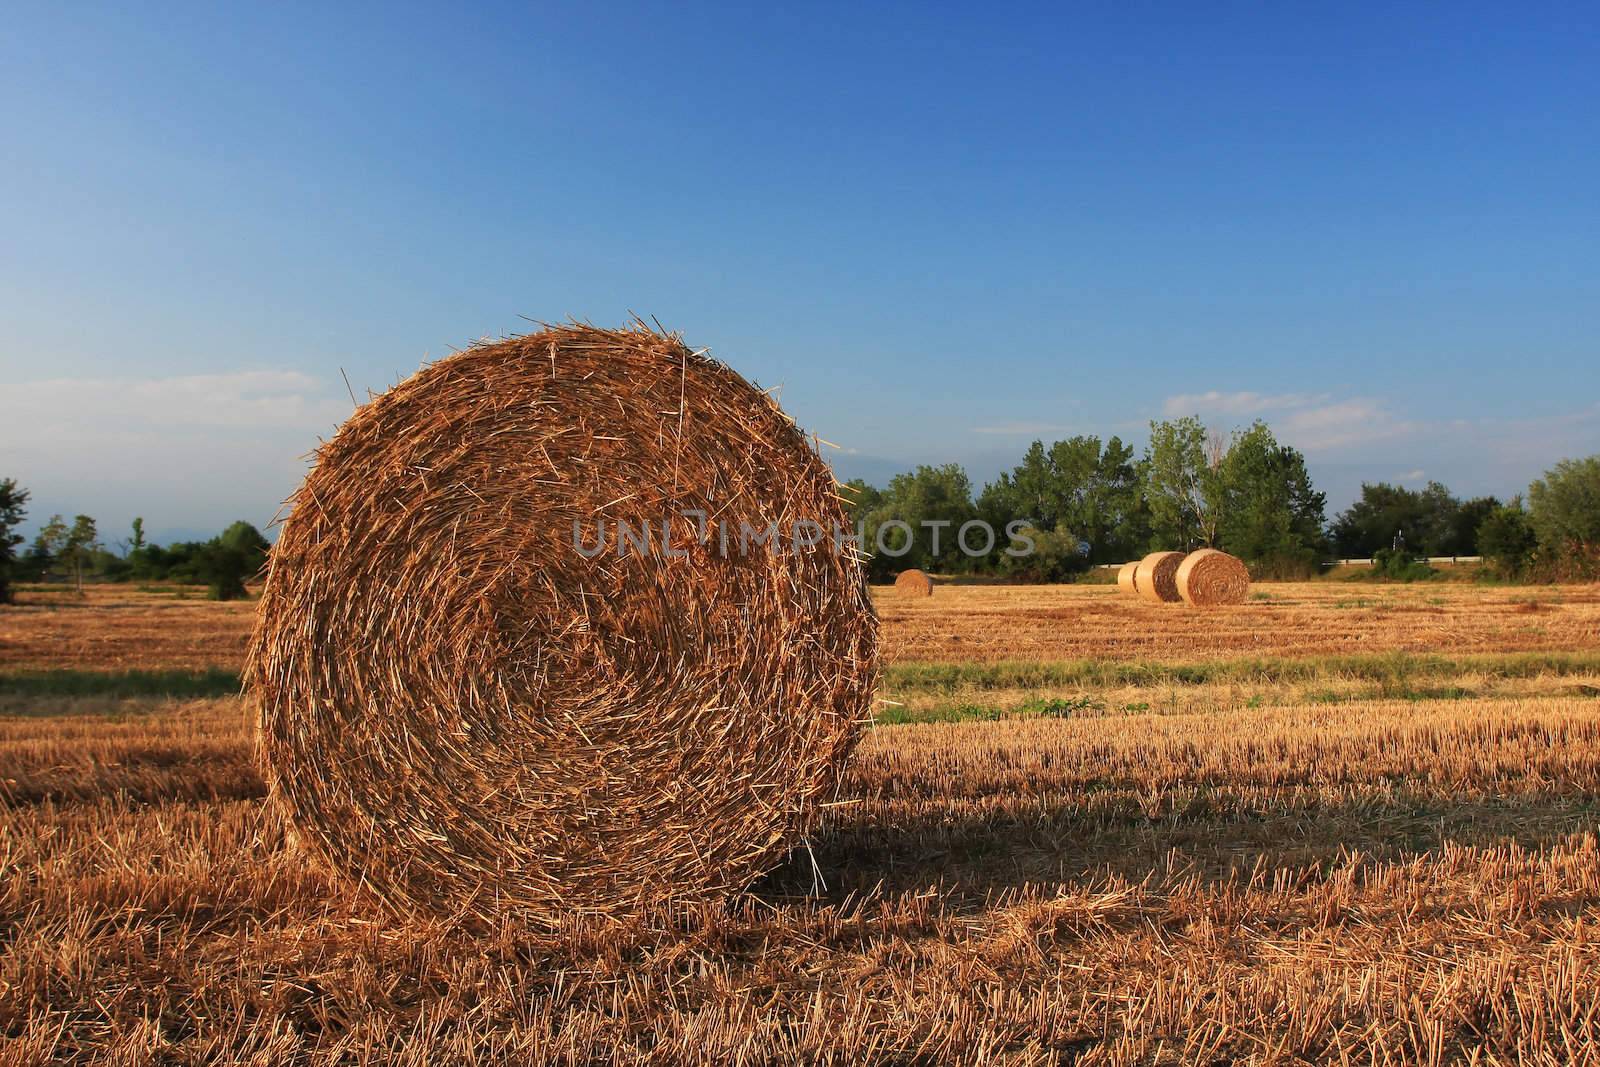 A close up of a hay bale on a corn field in Europe, shot in the warm afternoon sun, great warm feel to the image